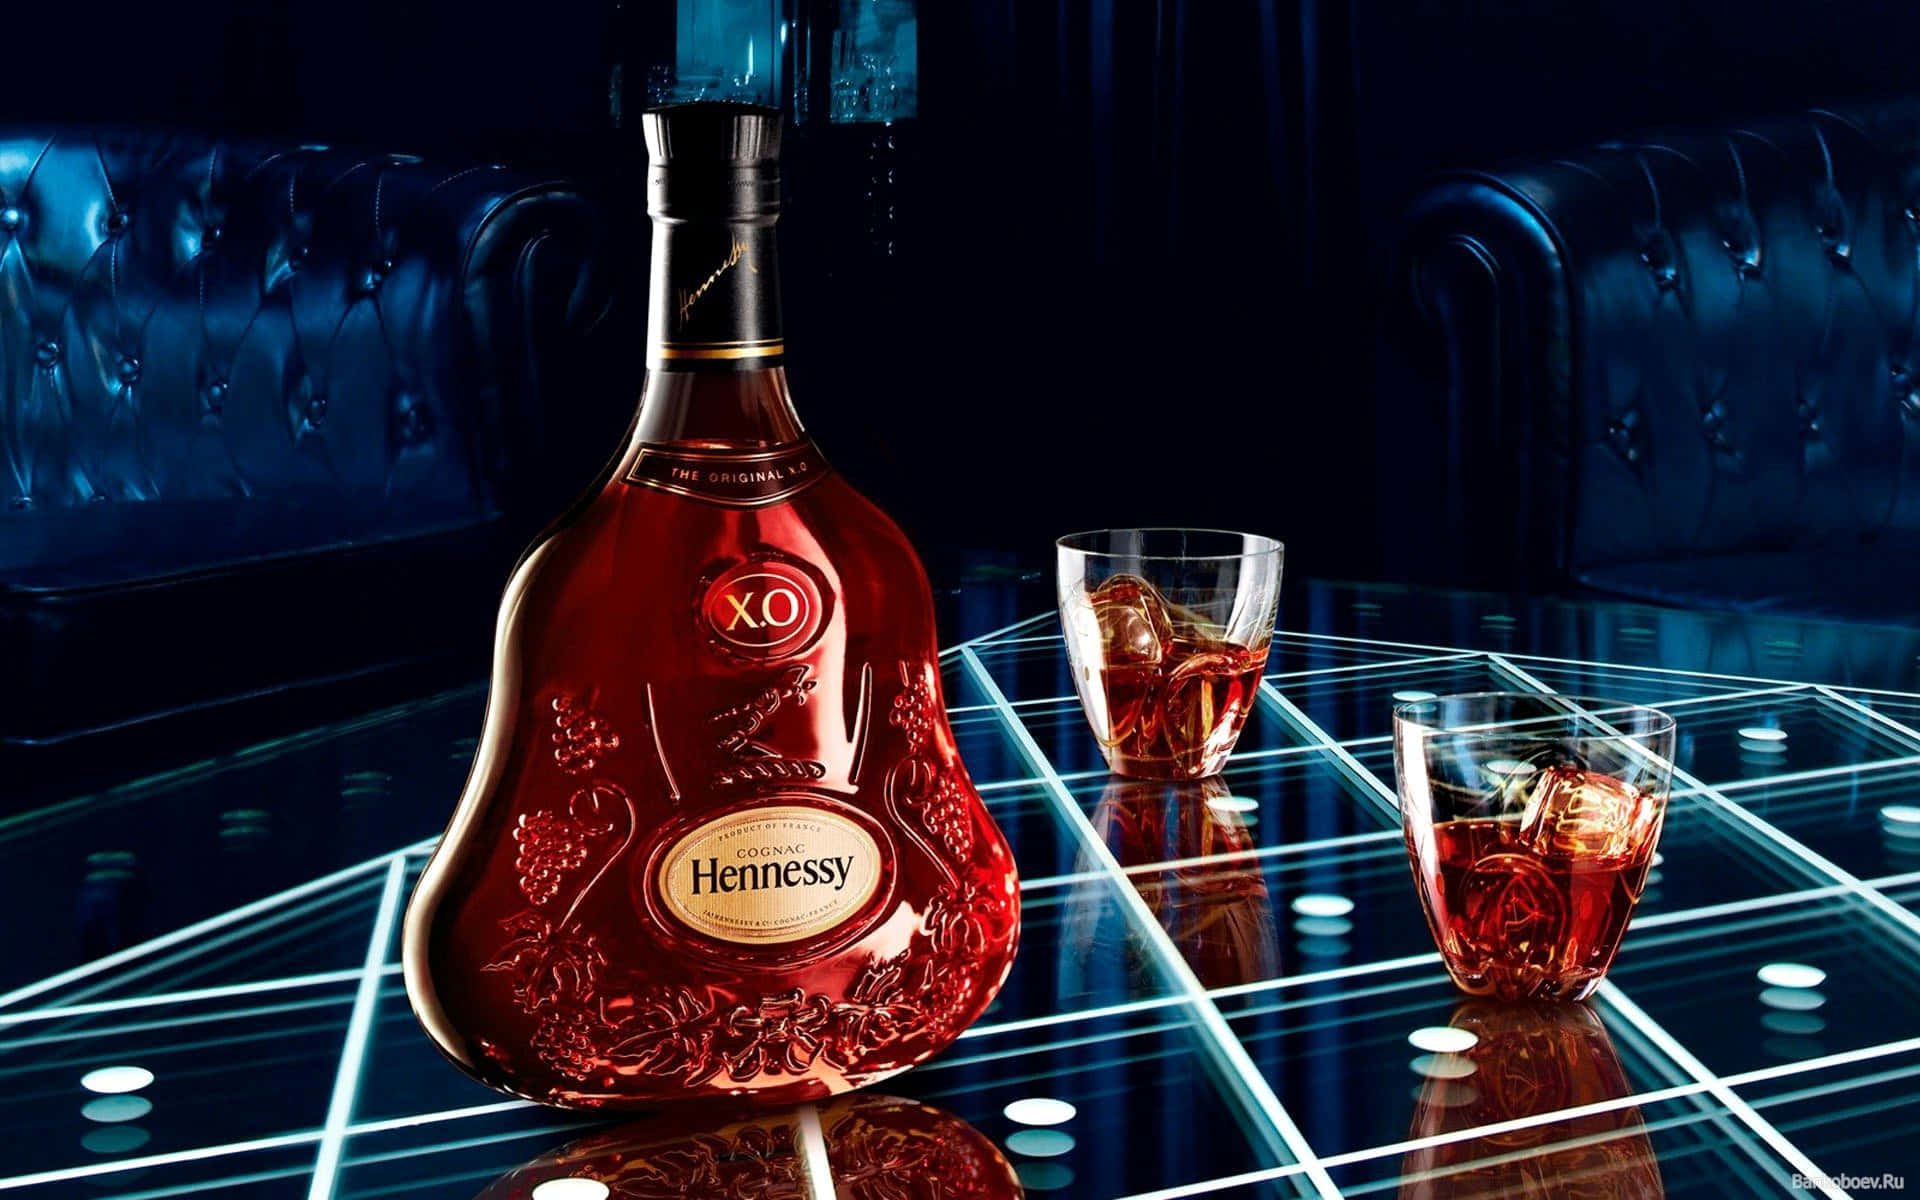 Image  "The Finest Cognac - Hennessy" Wallpaper